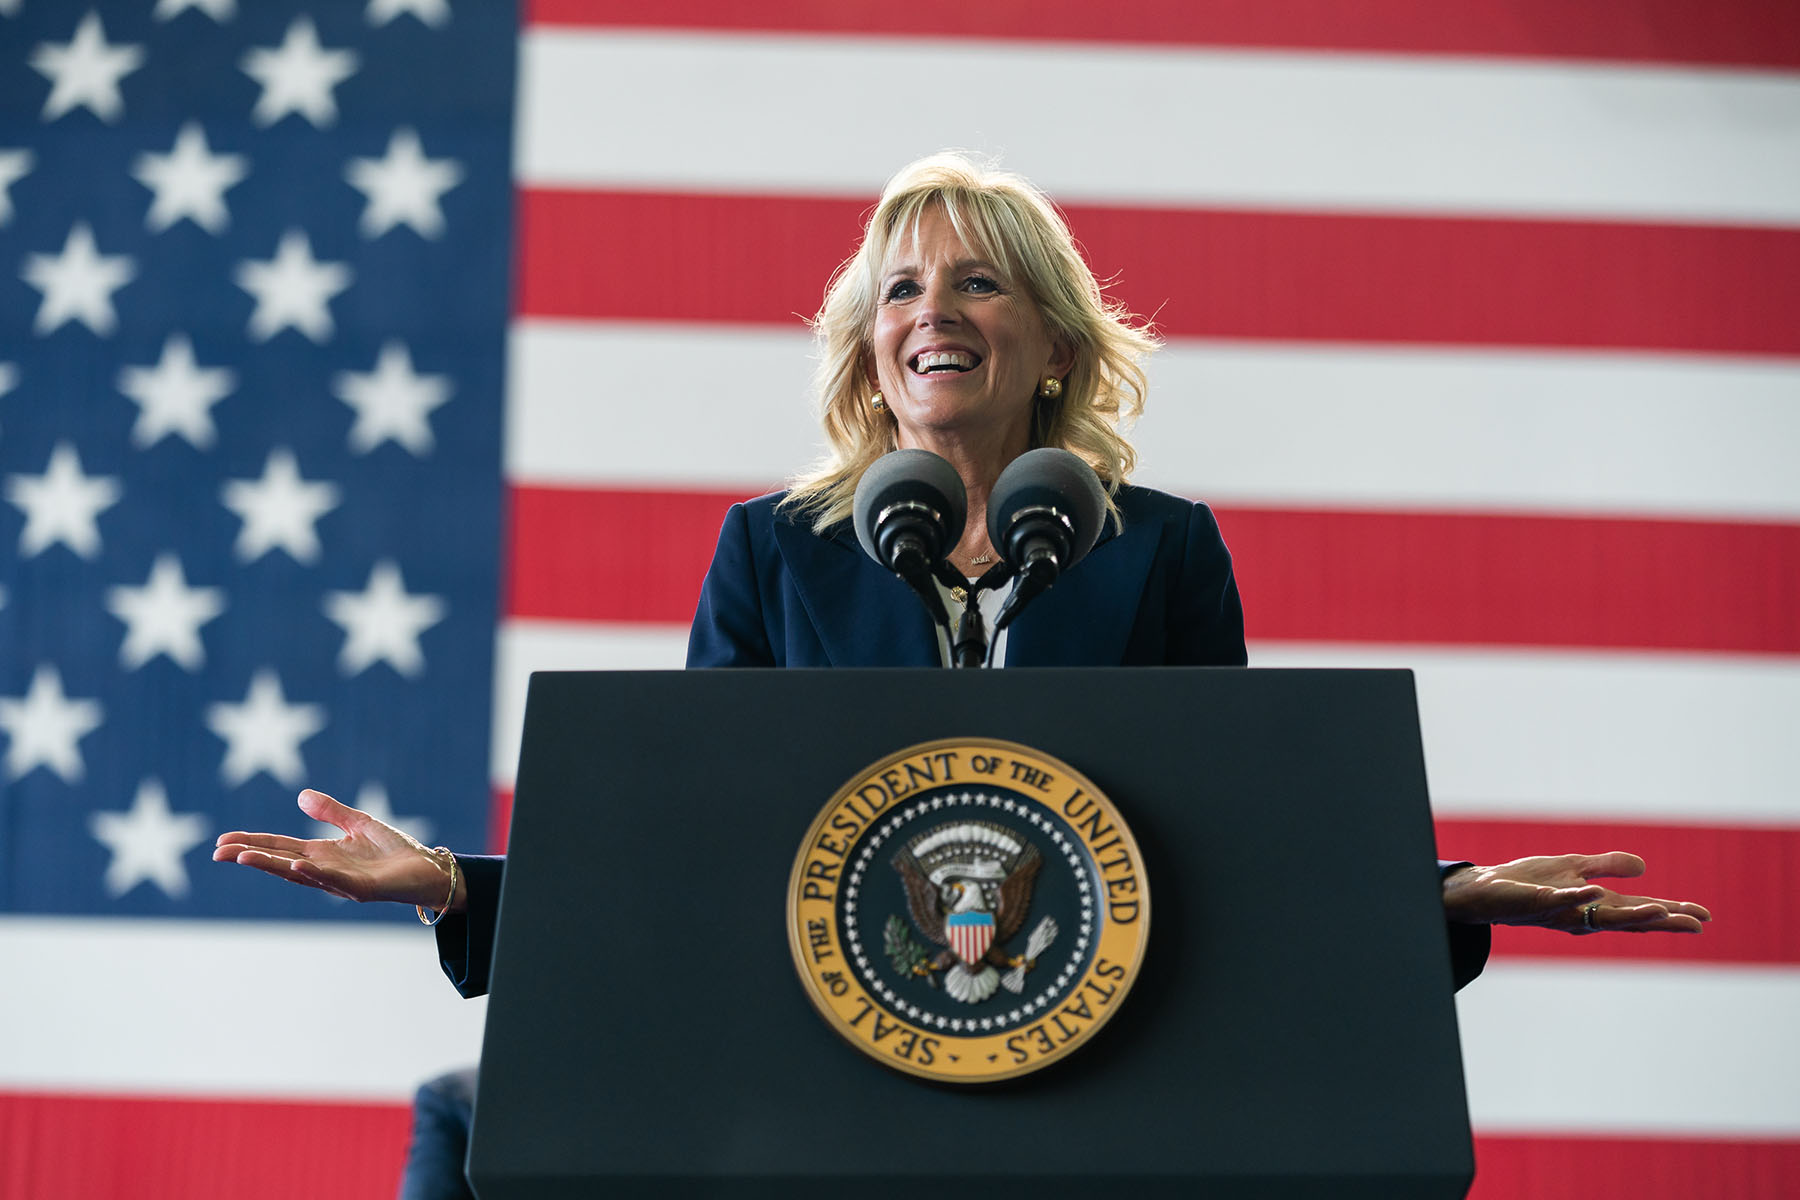 First Lady Jill Biden delivers remarks from a podium. Behind her is an American flag.